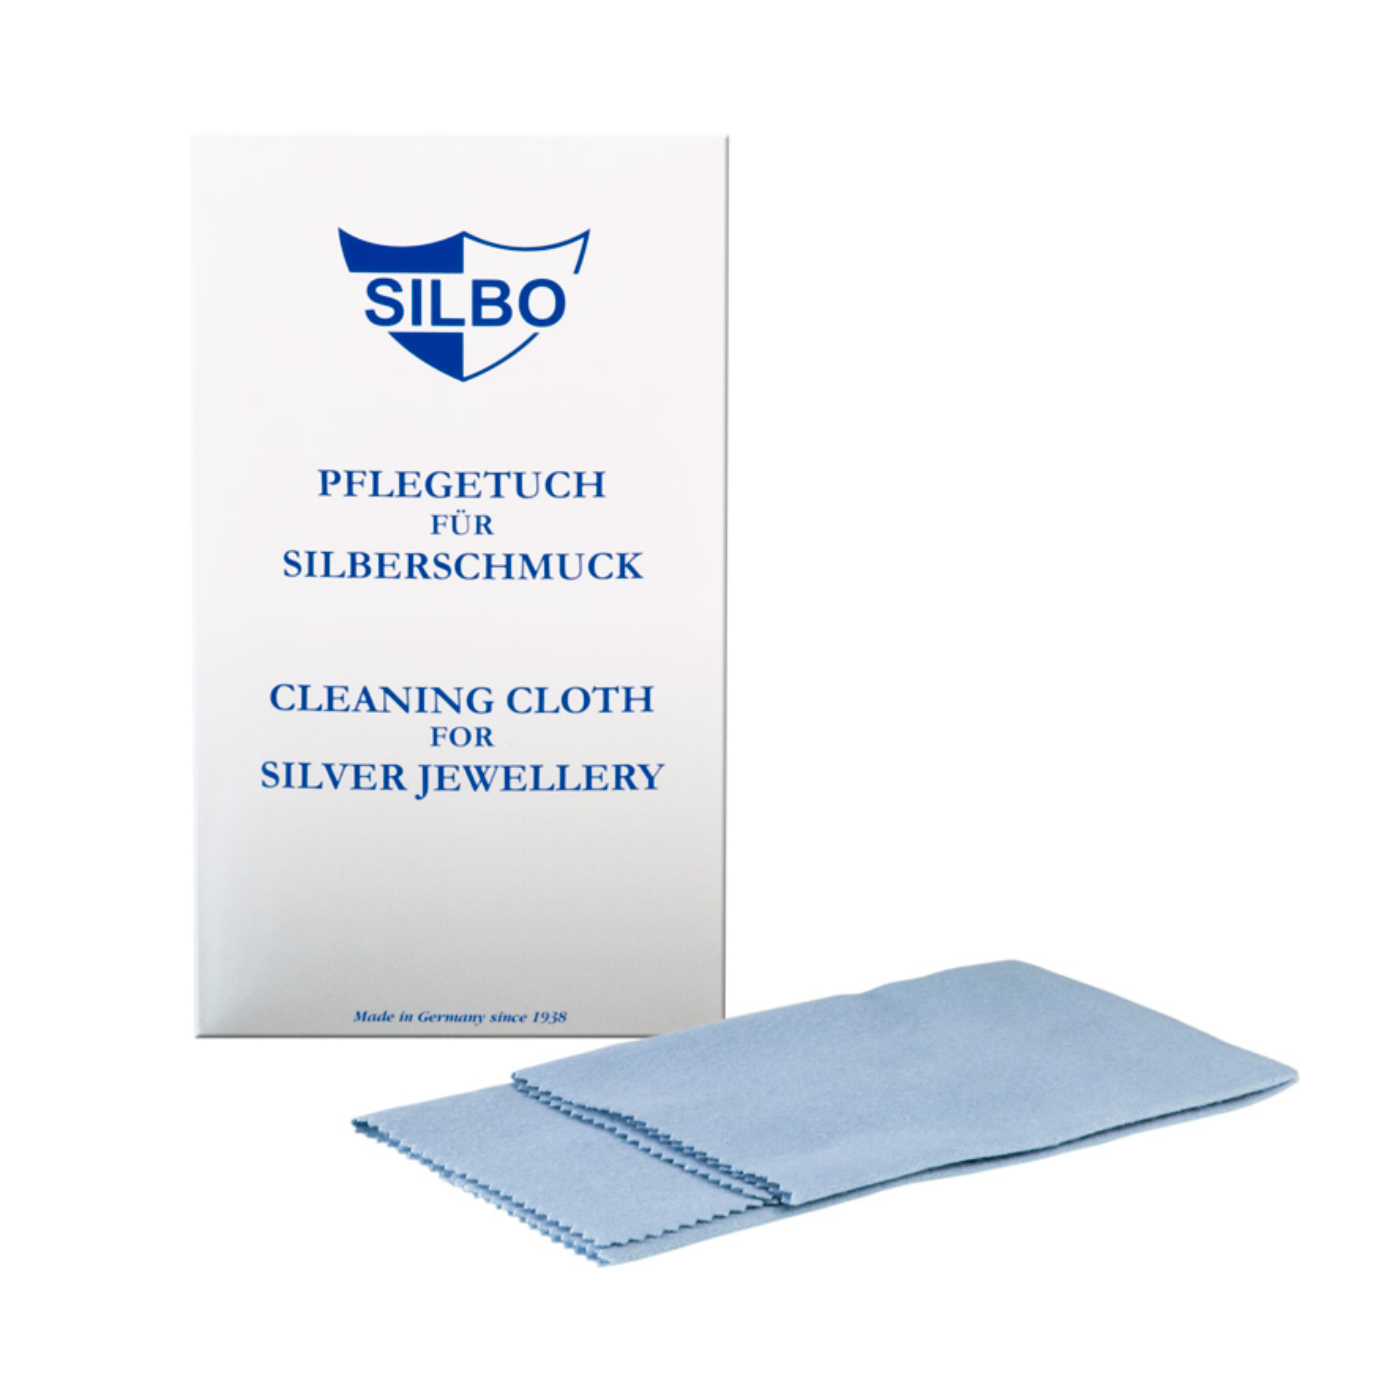 Silbo cleaning cloth for silver jewelry, cotton, 30 x 24 cm - 220612